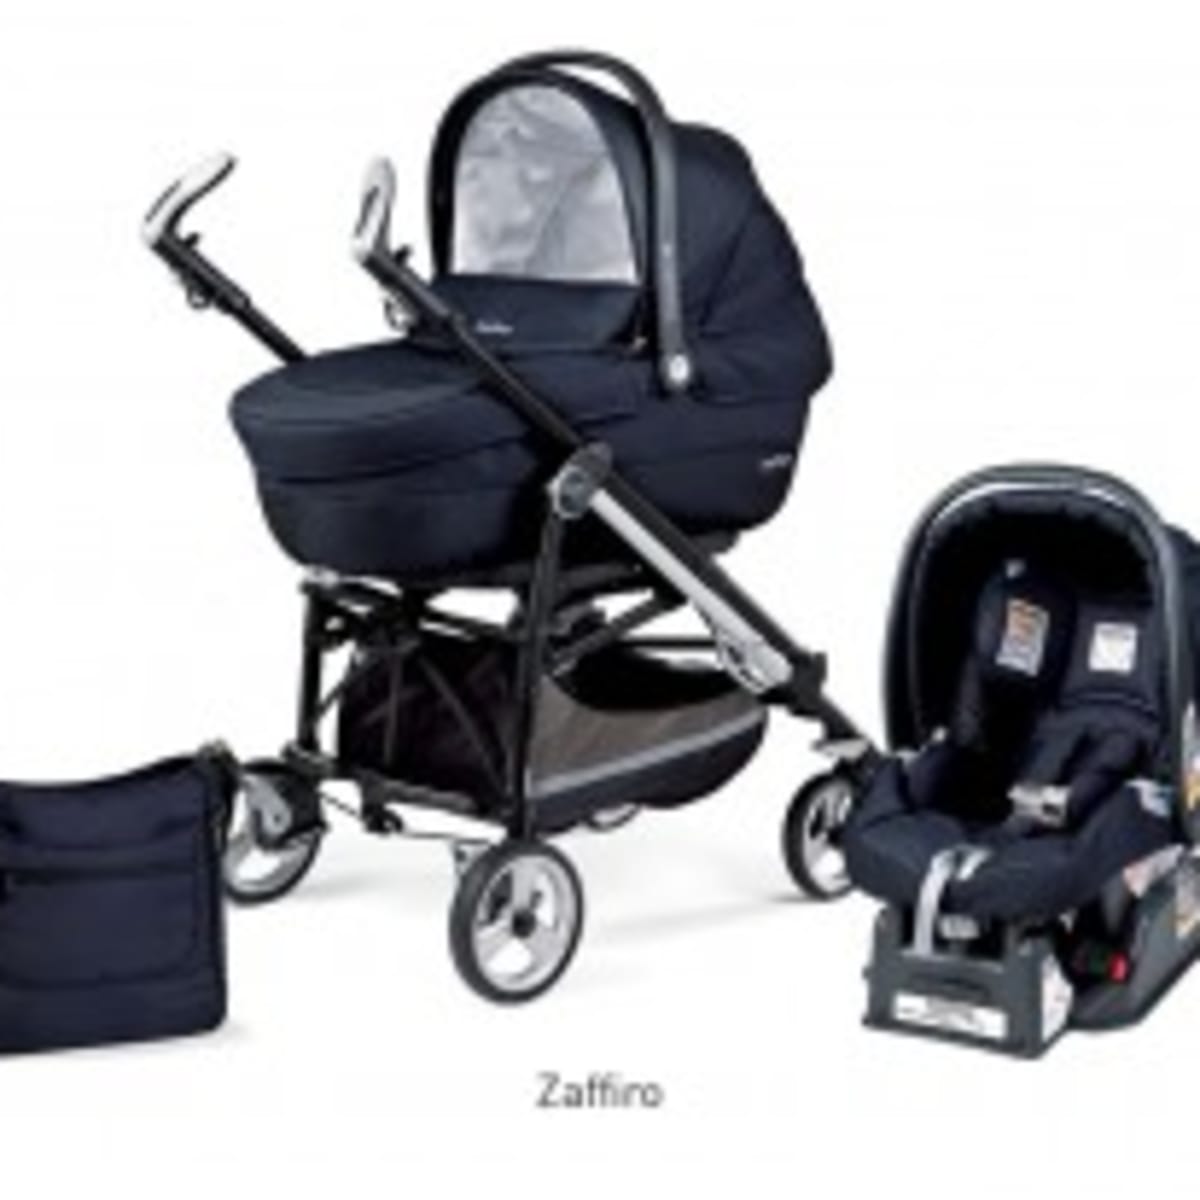 perego stroller review